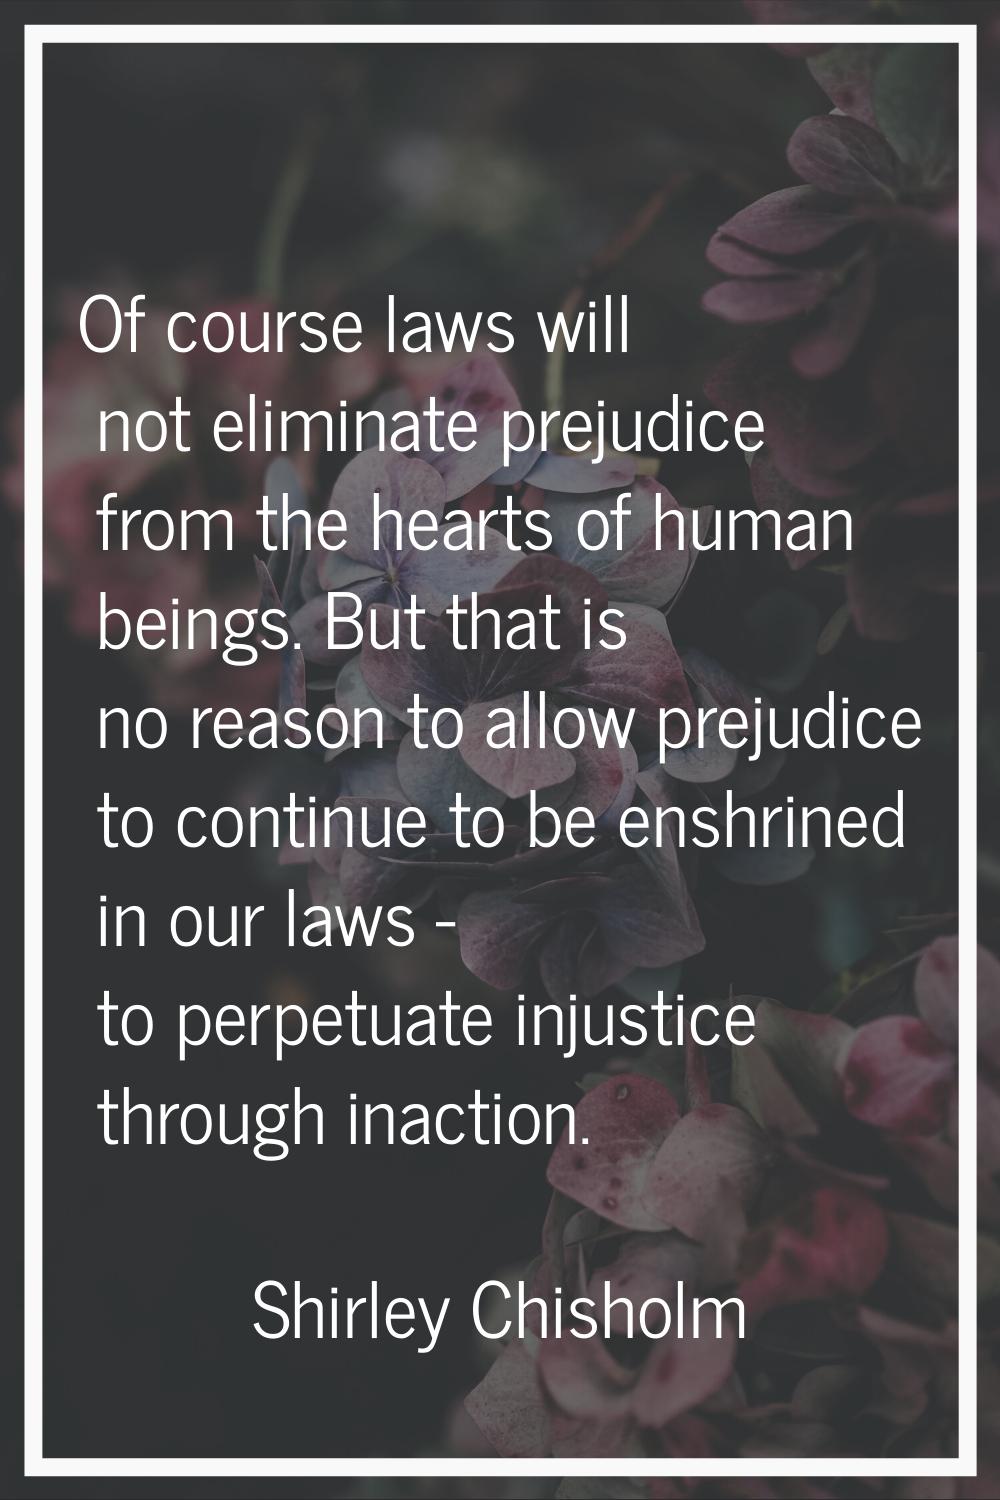 Of course laws will not eliminate prejudice from the hearts of human beings. But that is no reason 